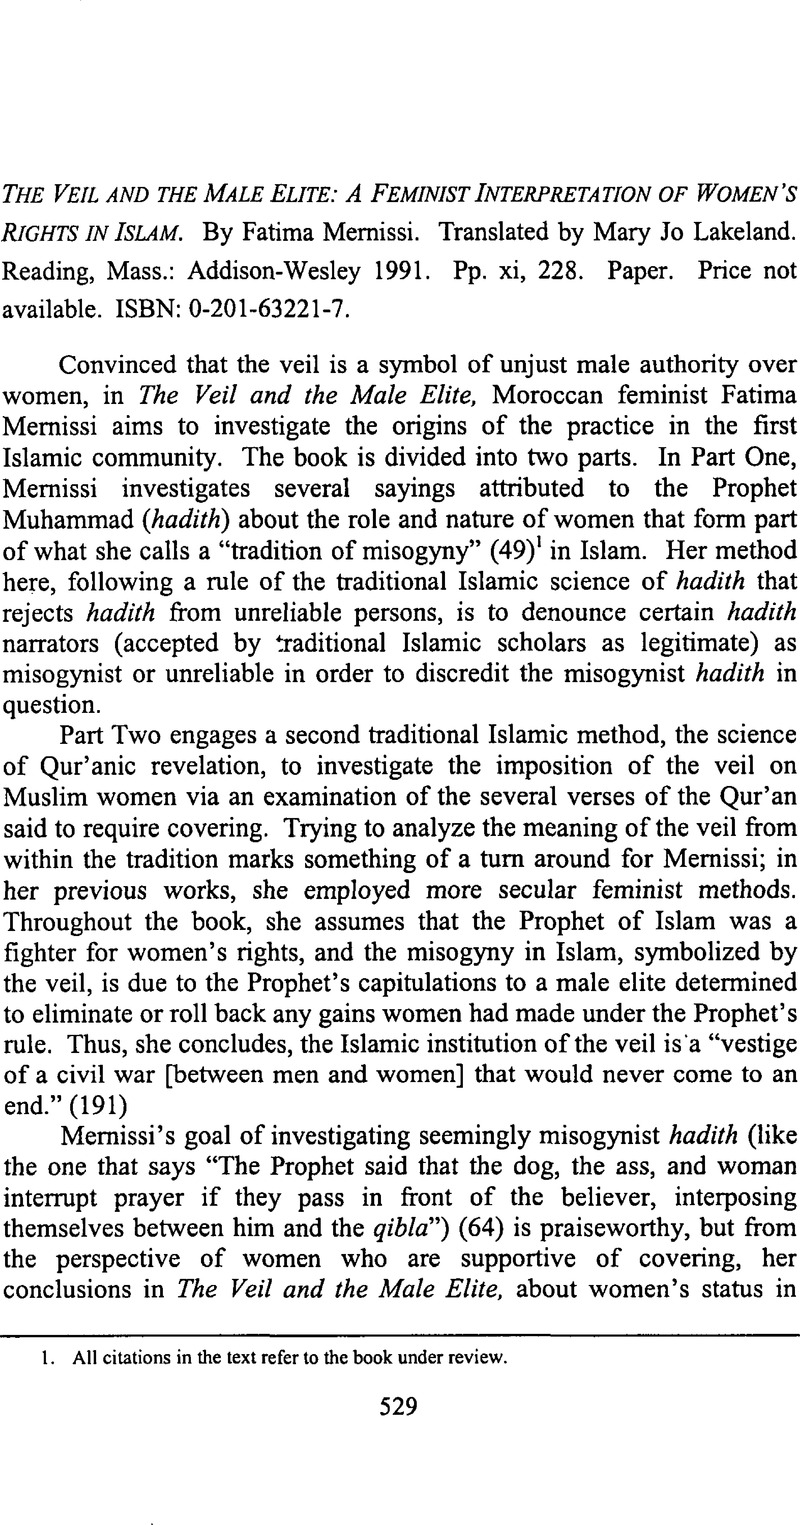 The Veil And The Male Elite A Feminist Interpretation Of Women S Rights In Islam By Fatima Mernissi Translated By Mary Jo Lakeland Reading Mass Addison Wesley1991 Pp Xi 228 Paper Price Not Available